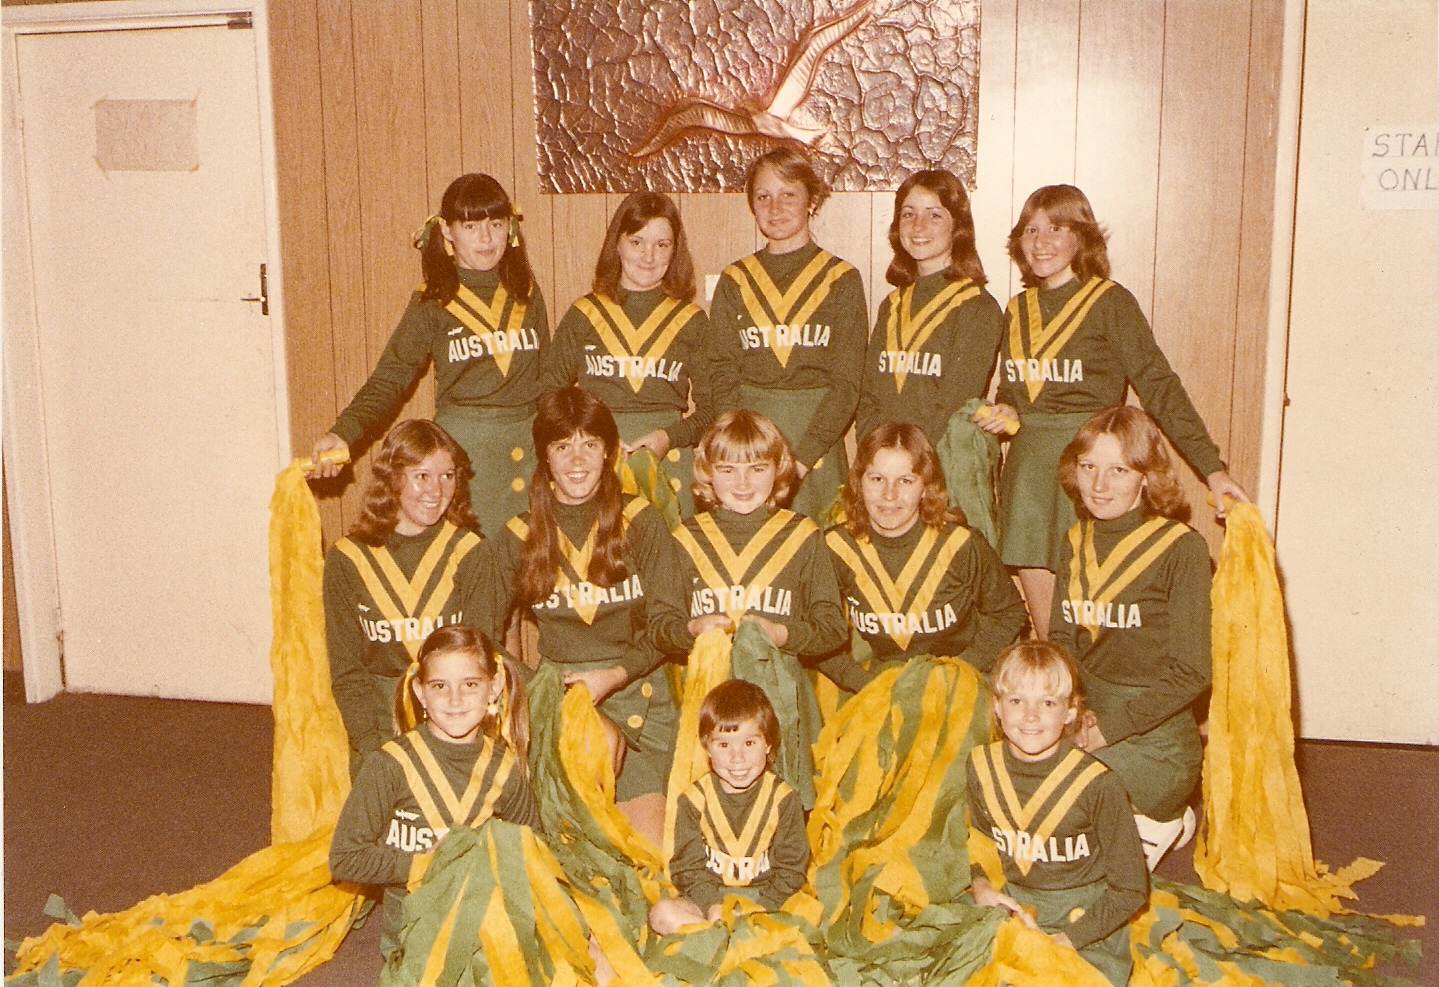 1978 The Wynnum Manly Rugby League Cheersquad